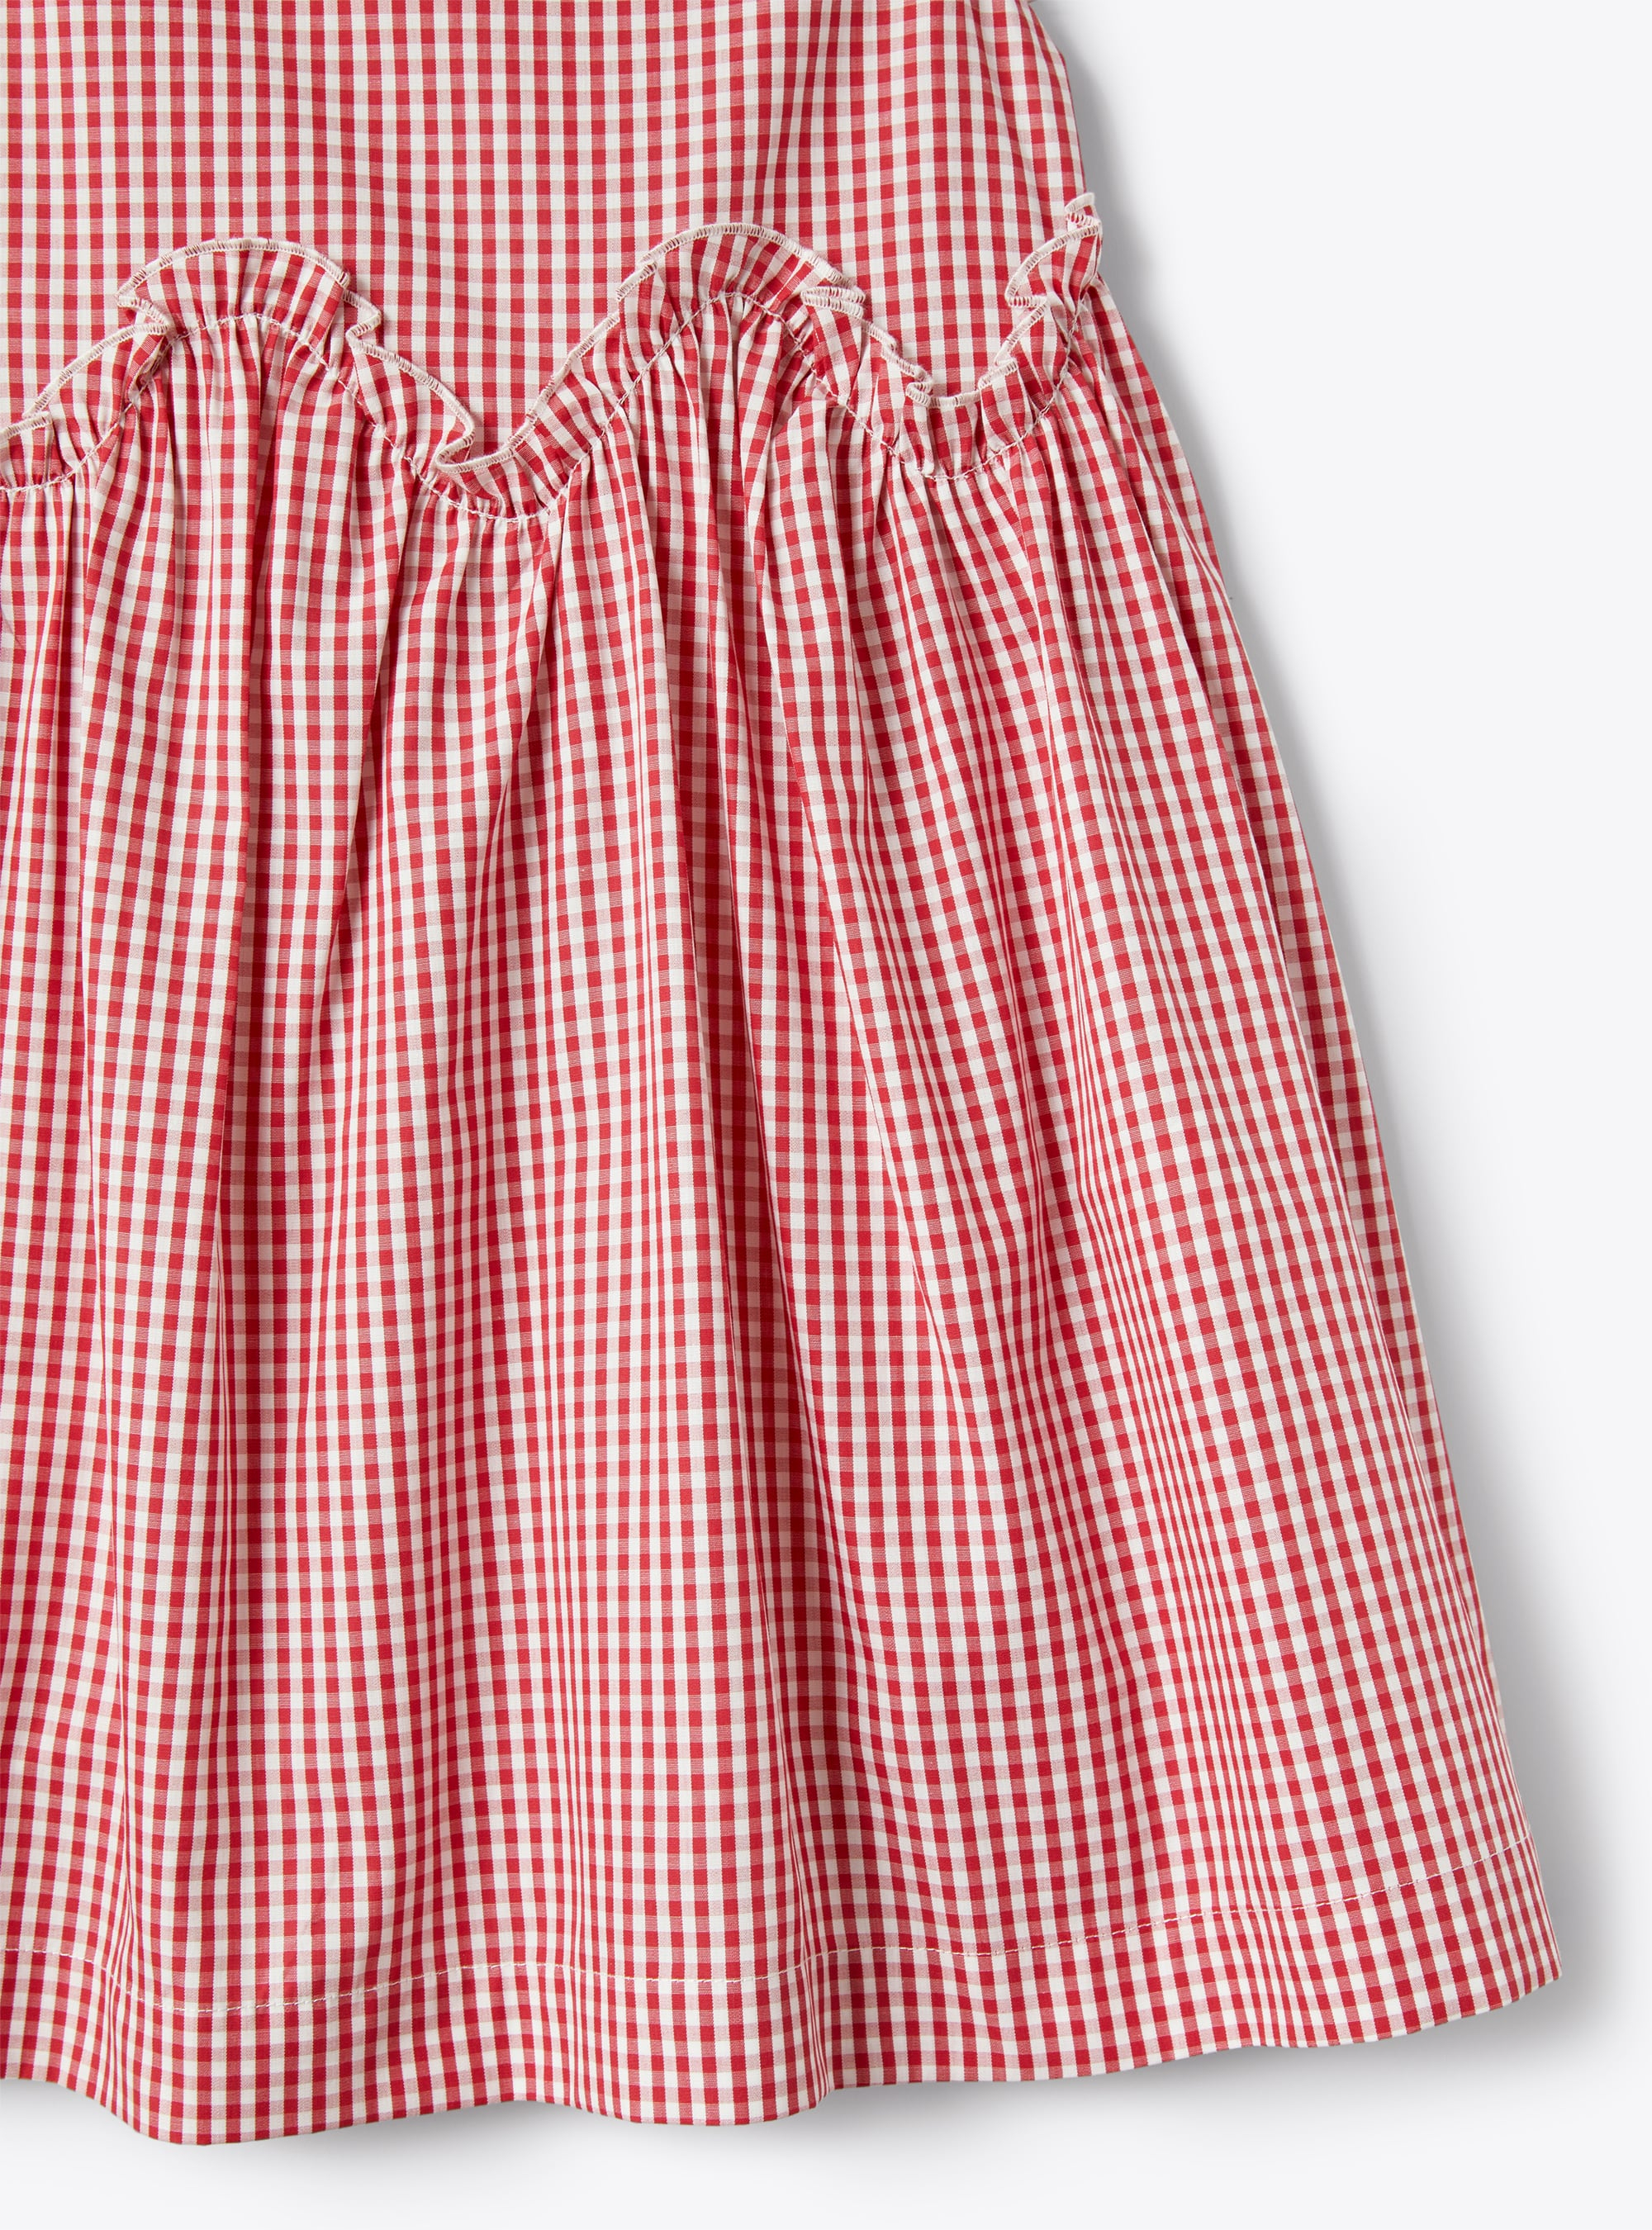 Sleeveless dress in a gingham-check pattern - Red | Il Gufo